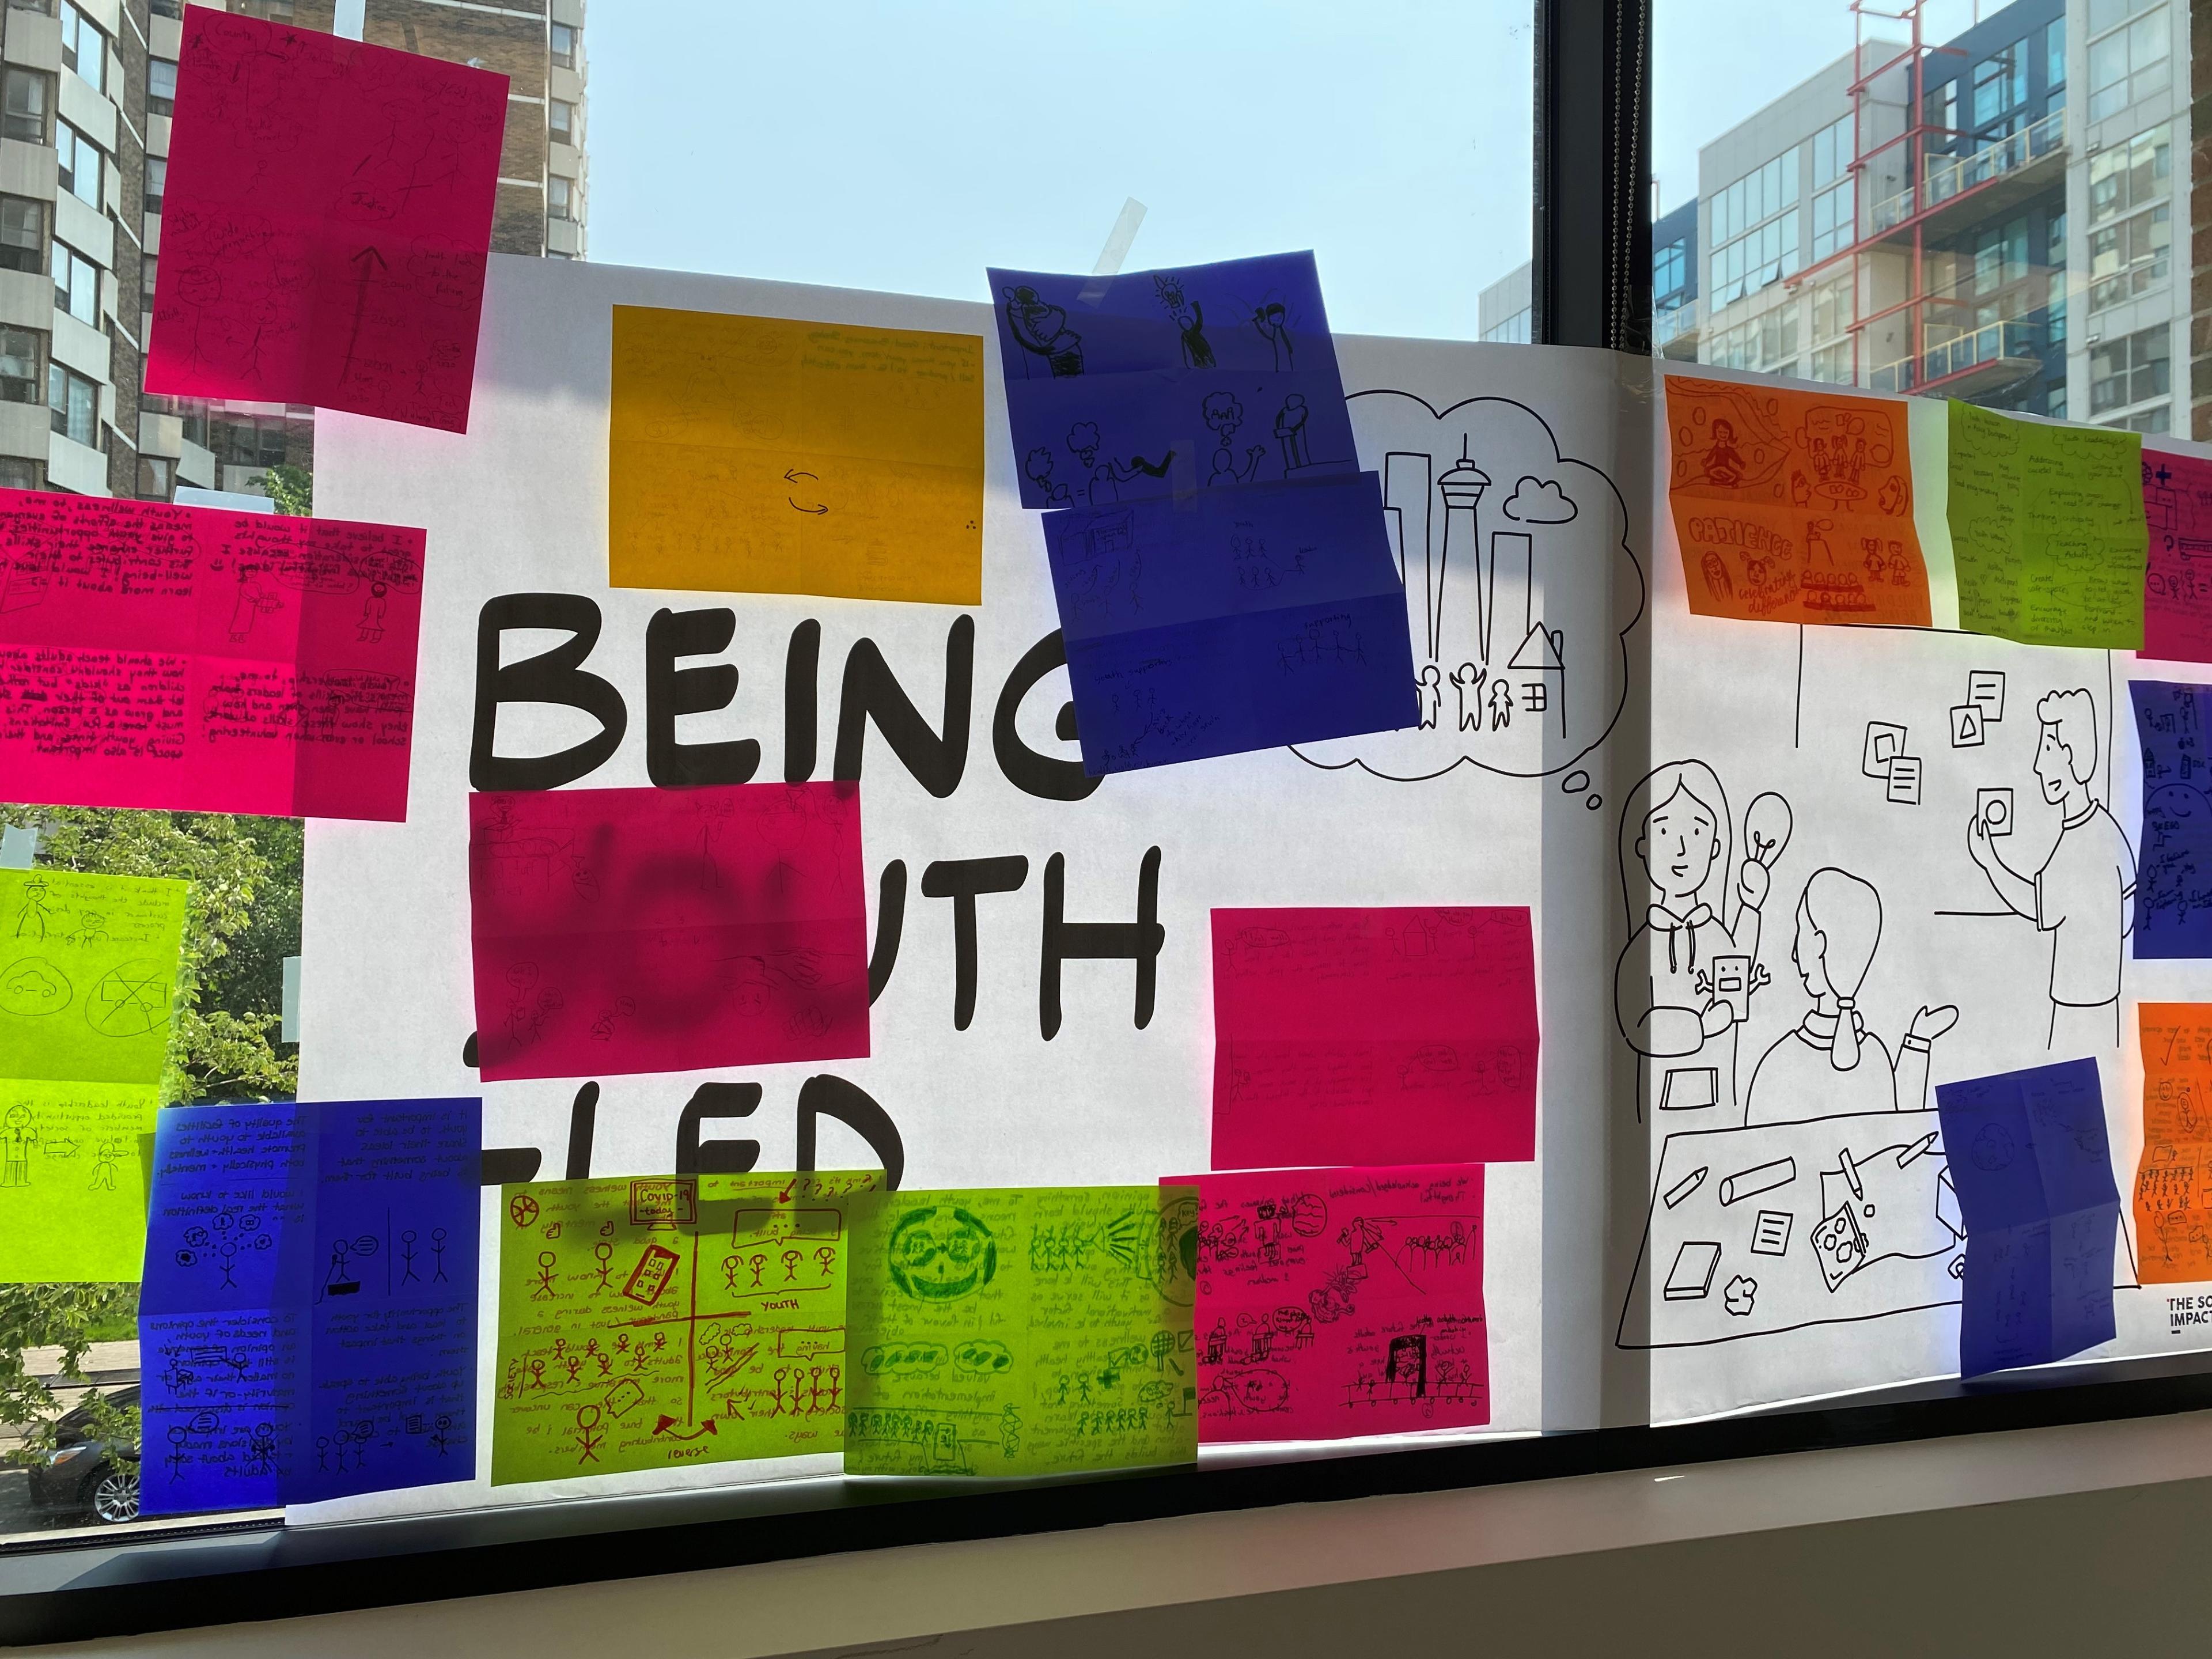 Post-its stuck to glass with poster that says "Being Youth Led"